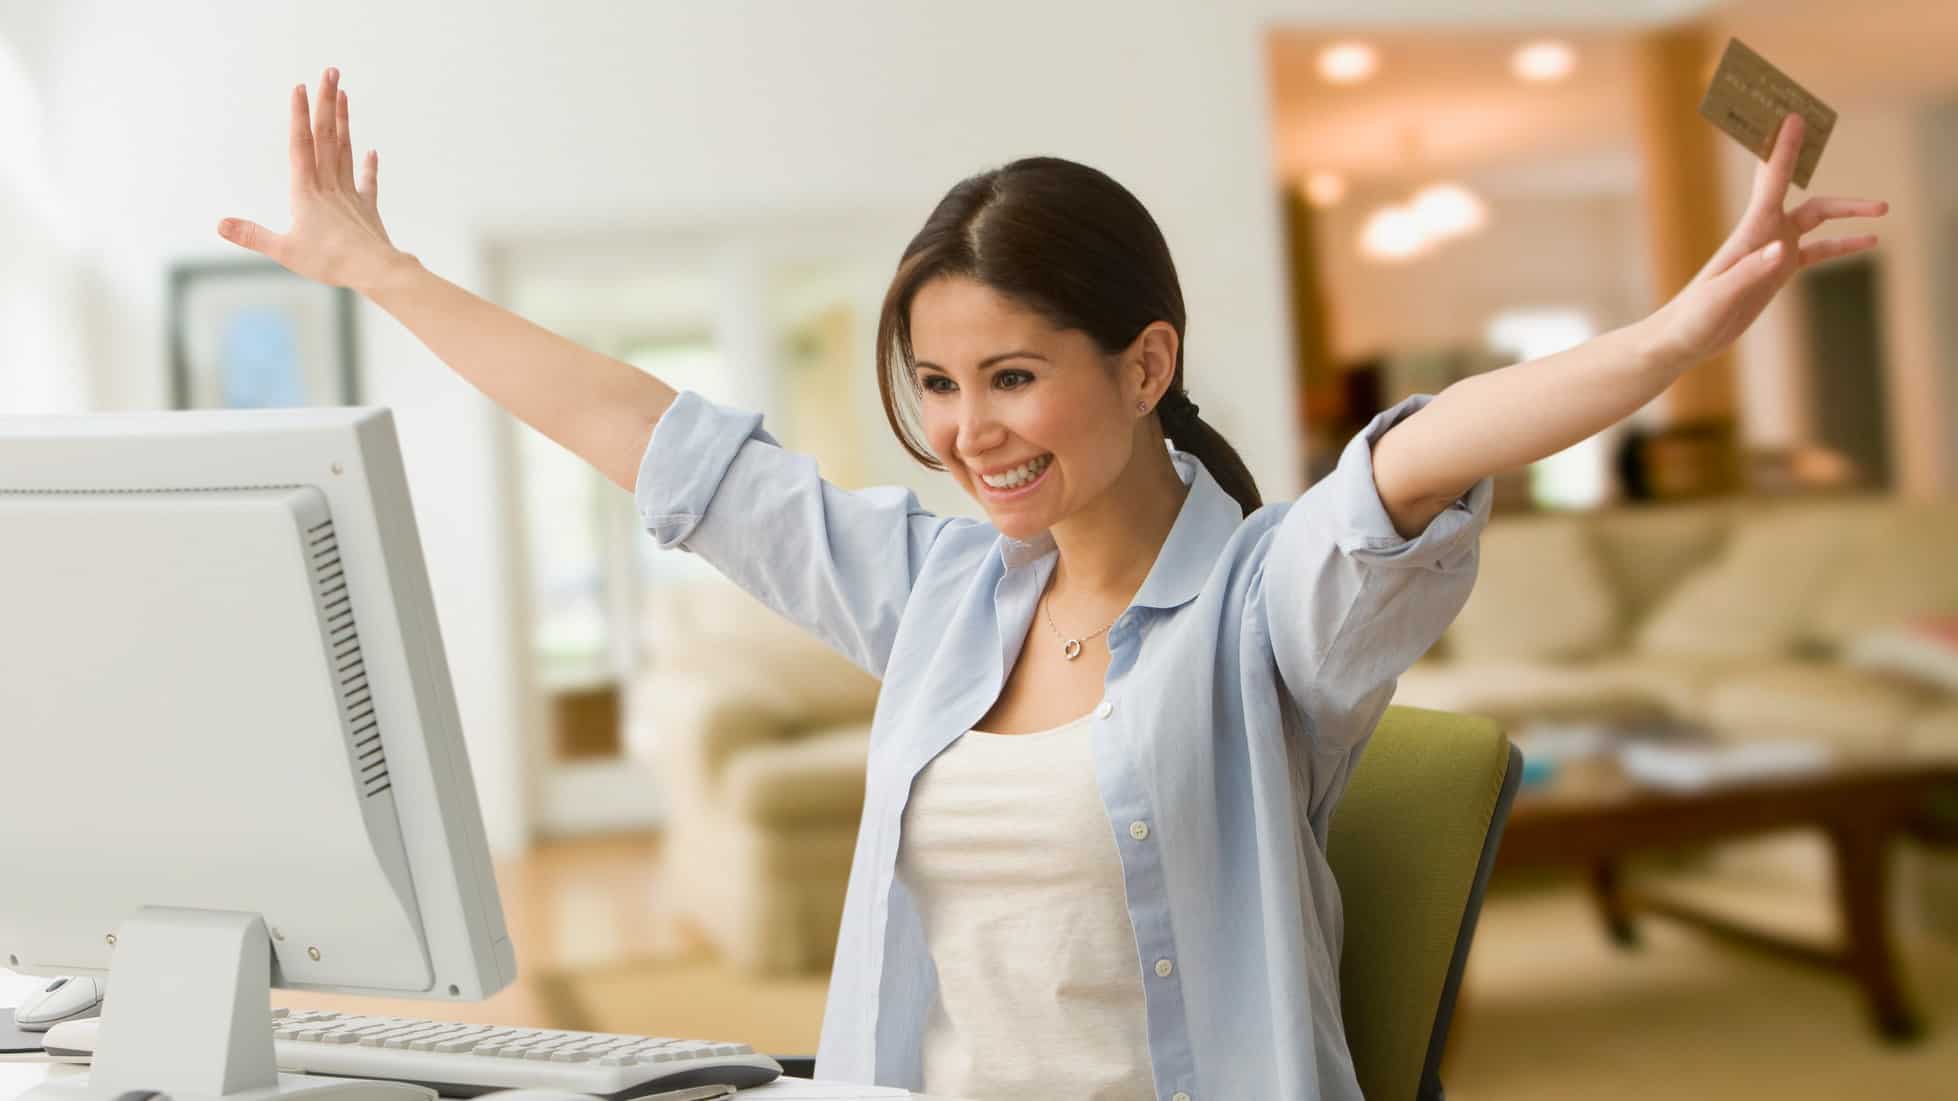 Cheering woman shopping online with credit card